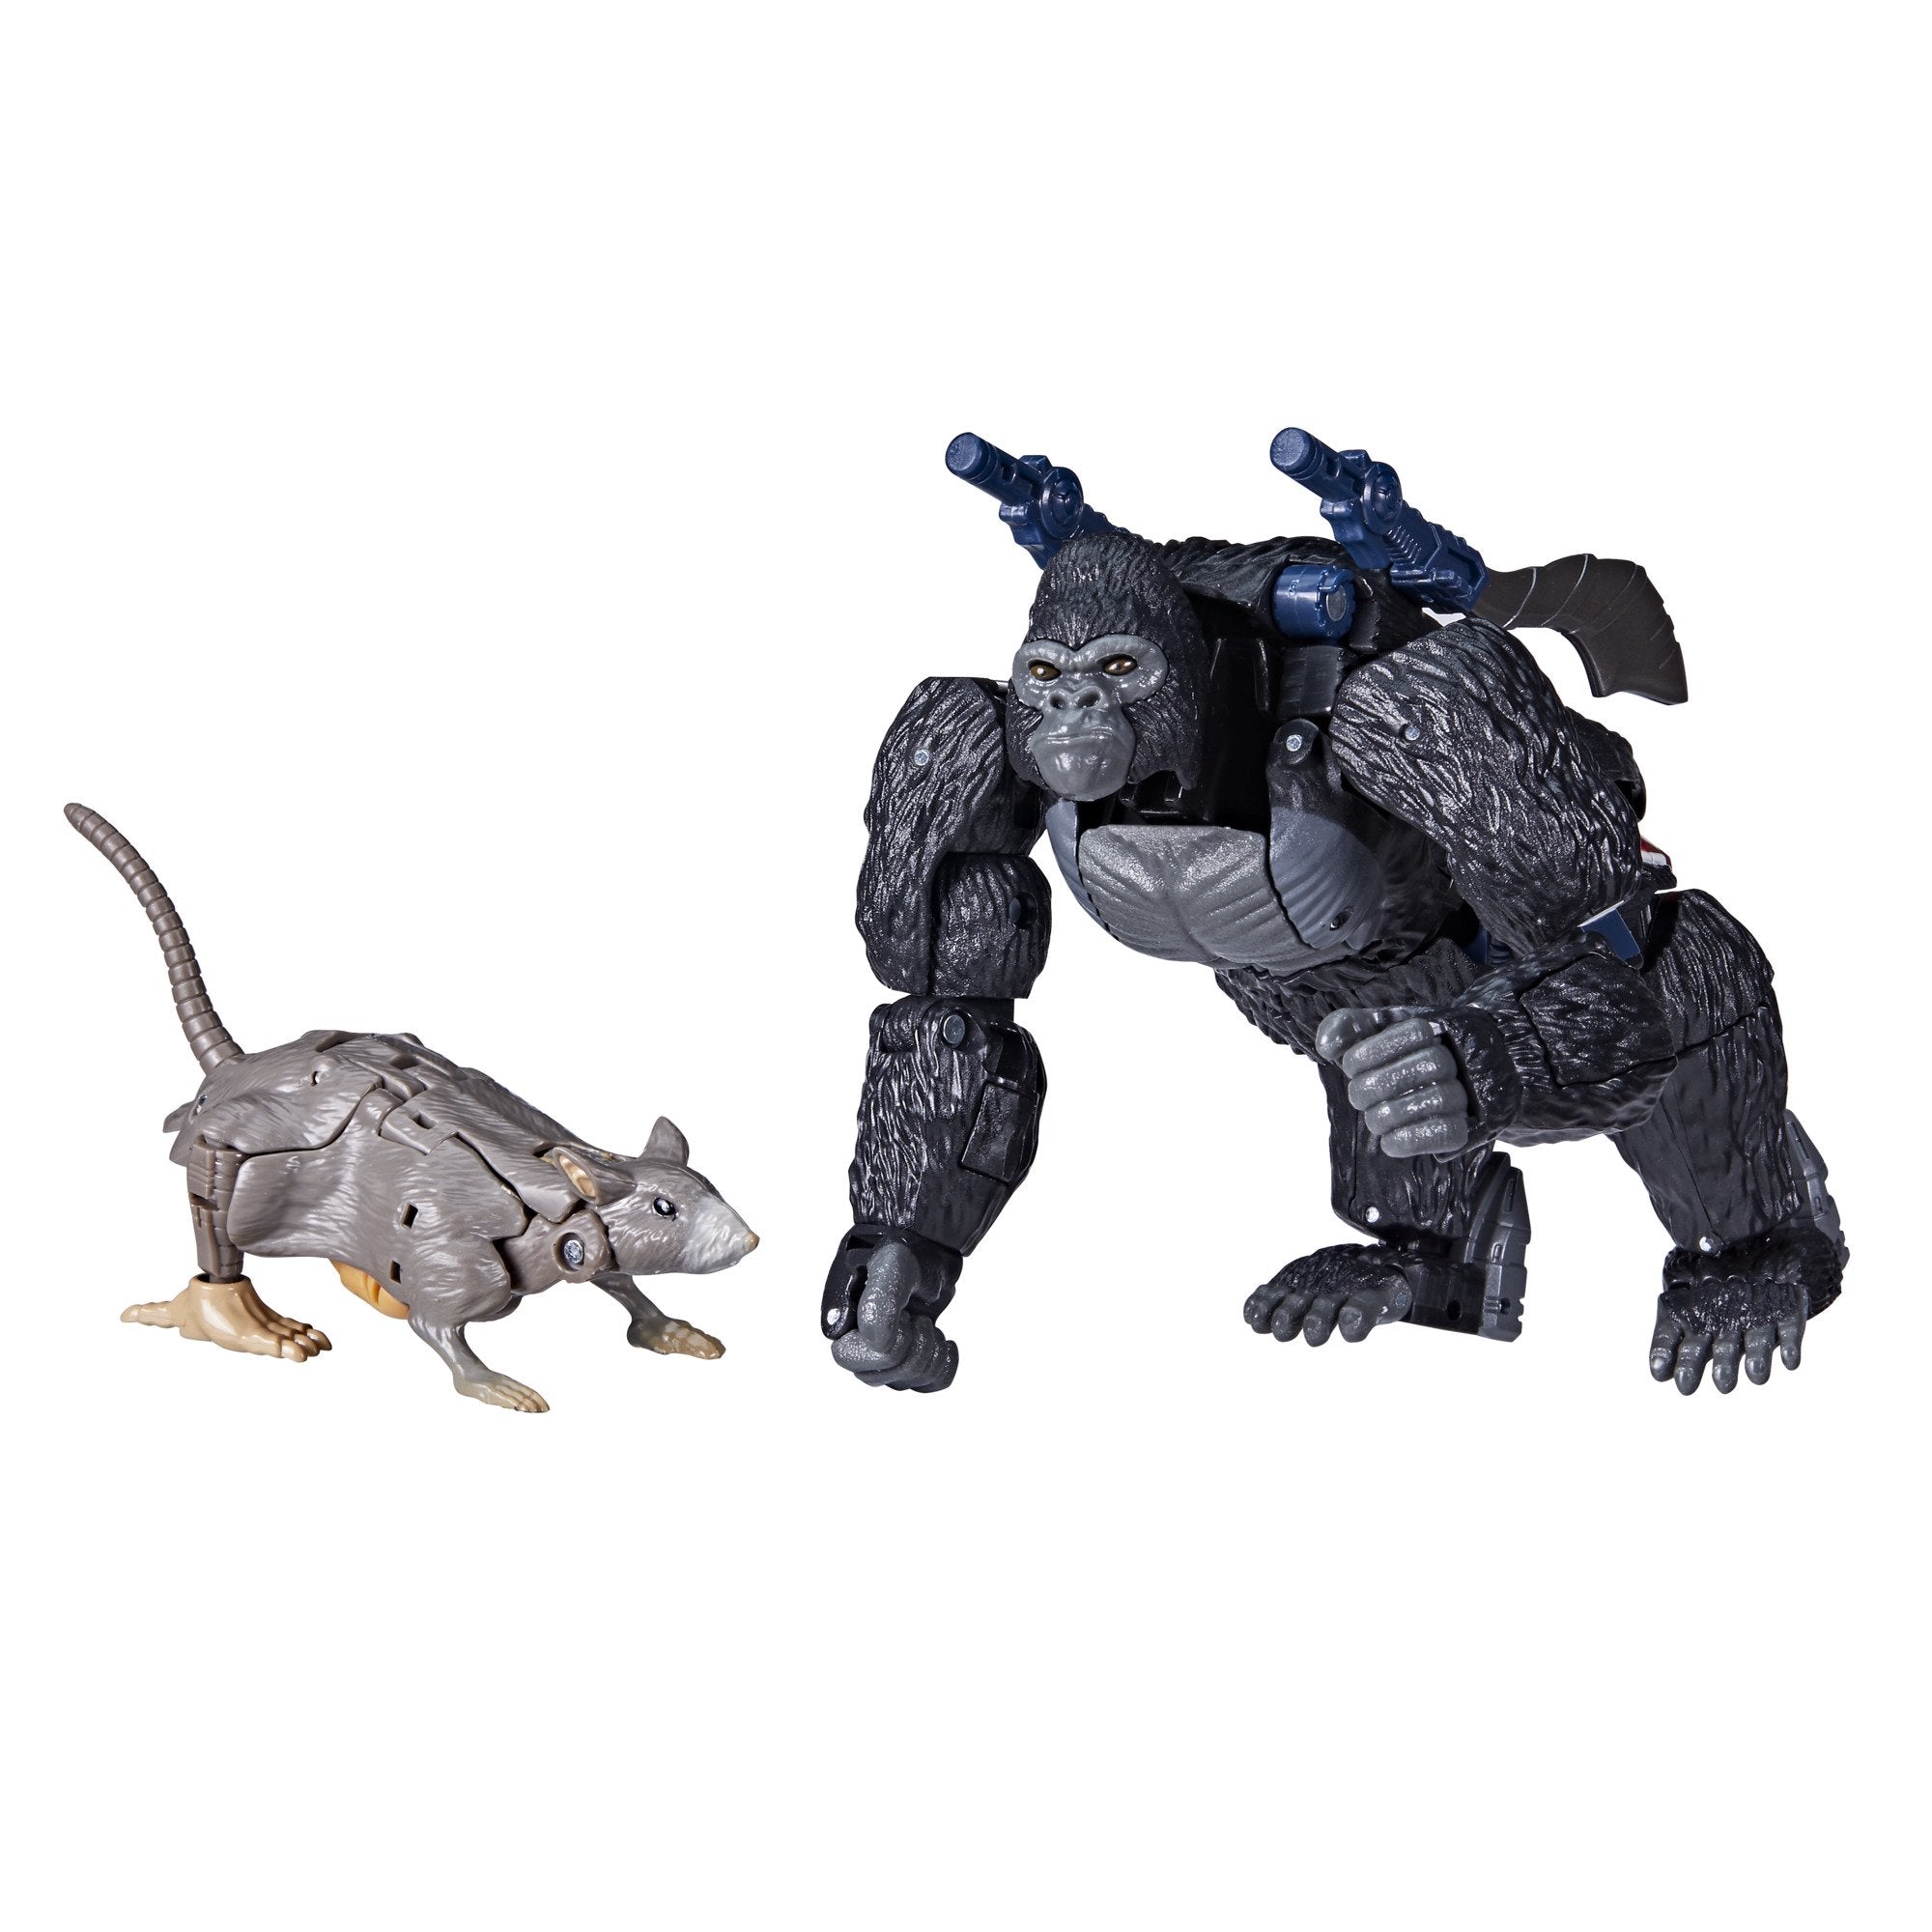 Transformers Generations Netflix War For Cybertron: Trilogy Voyager Optimus Primal and Core Rattrap Action Figure Exclusive